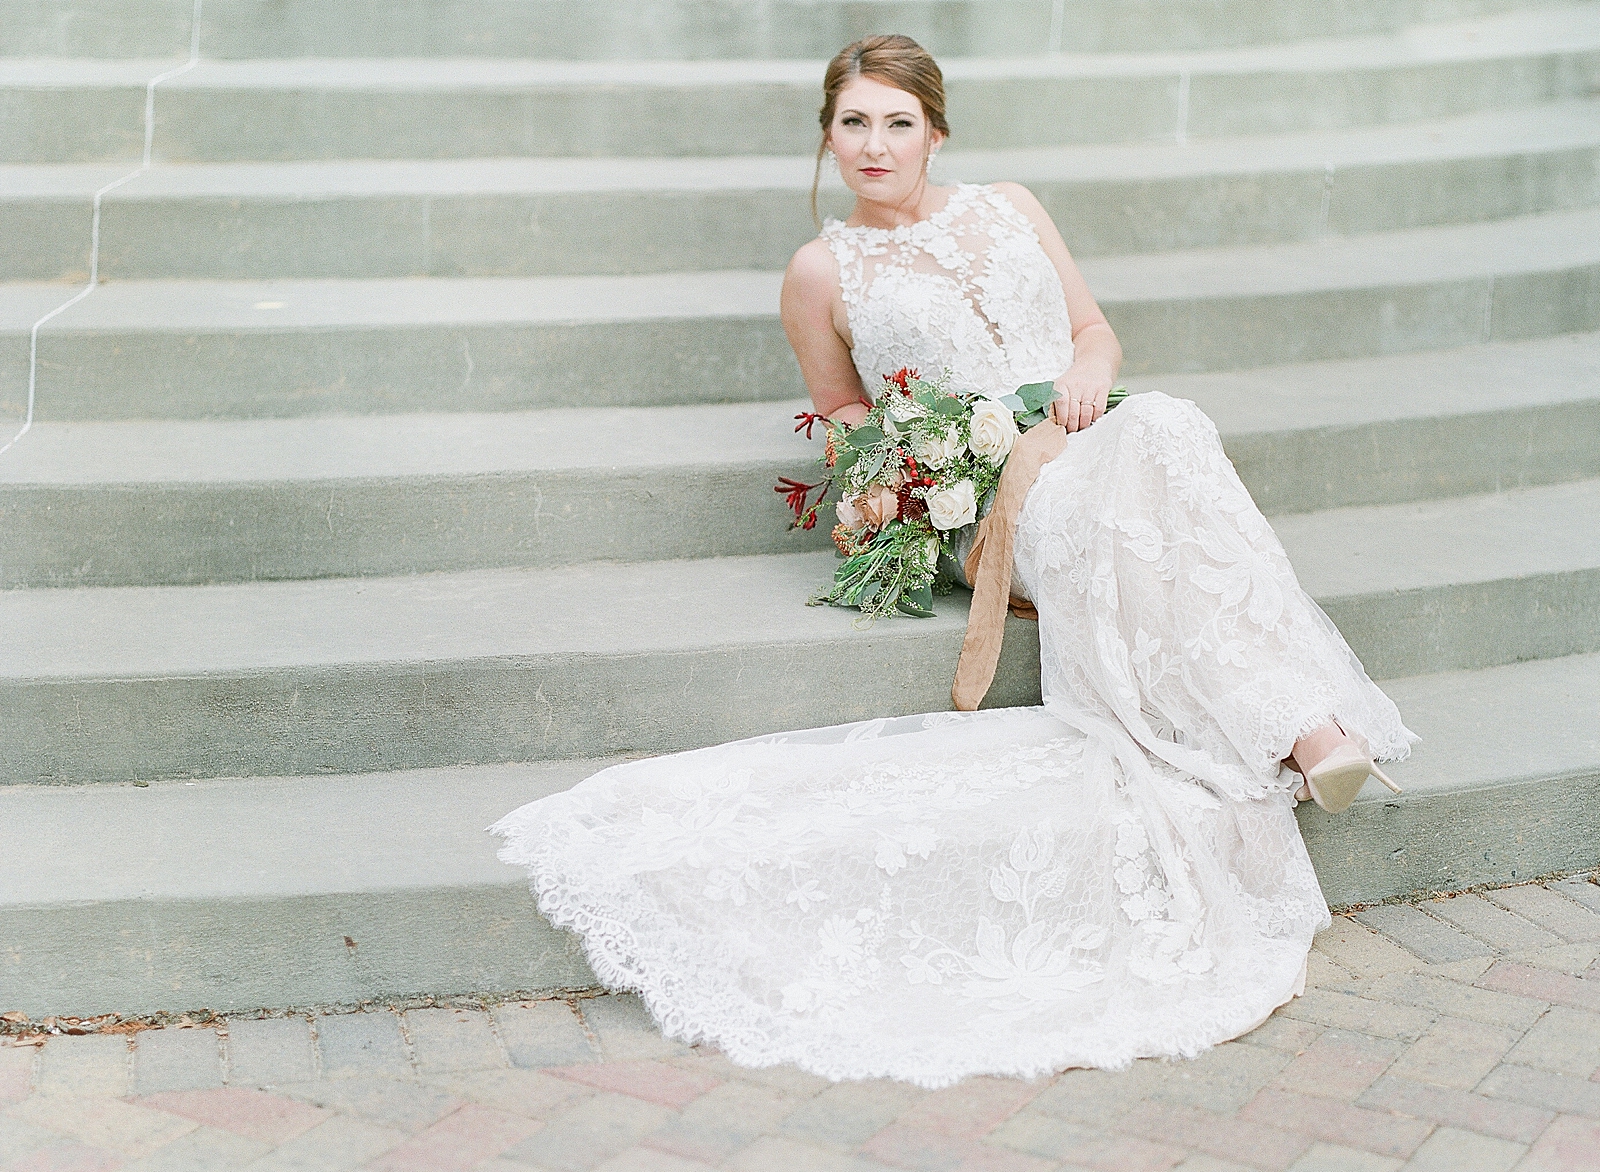 Asheville Bridal Editorial Bride Sitting on Stairs looking at Camera Photo